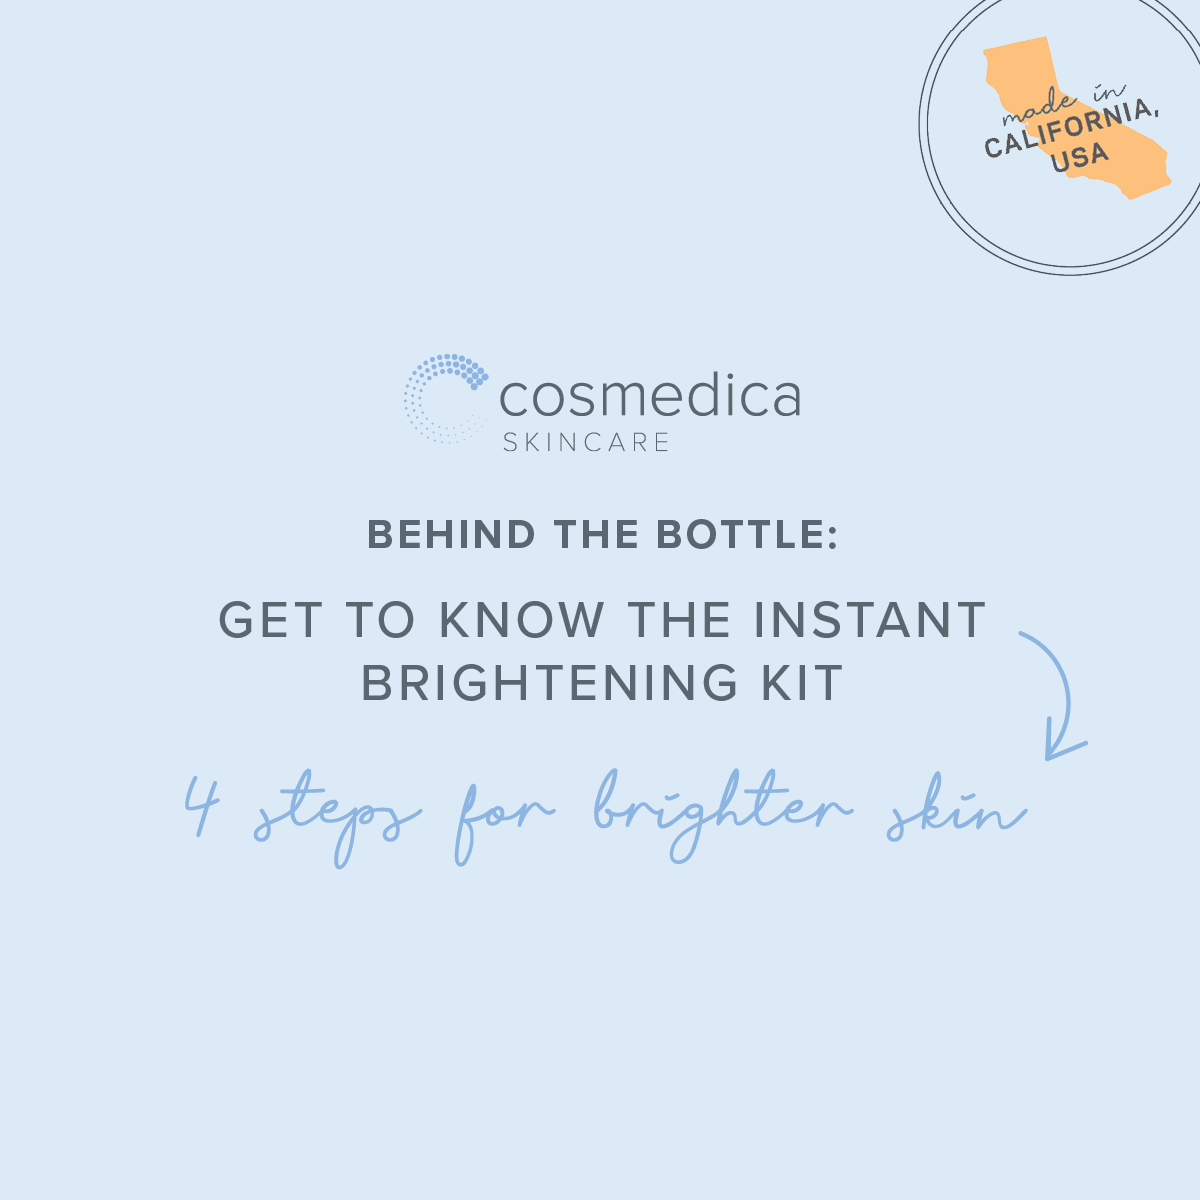 Behind the Bottle: Get To Know The Instant Brightening Kit